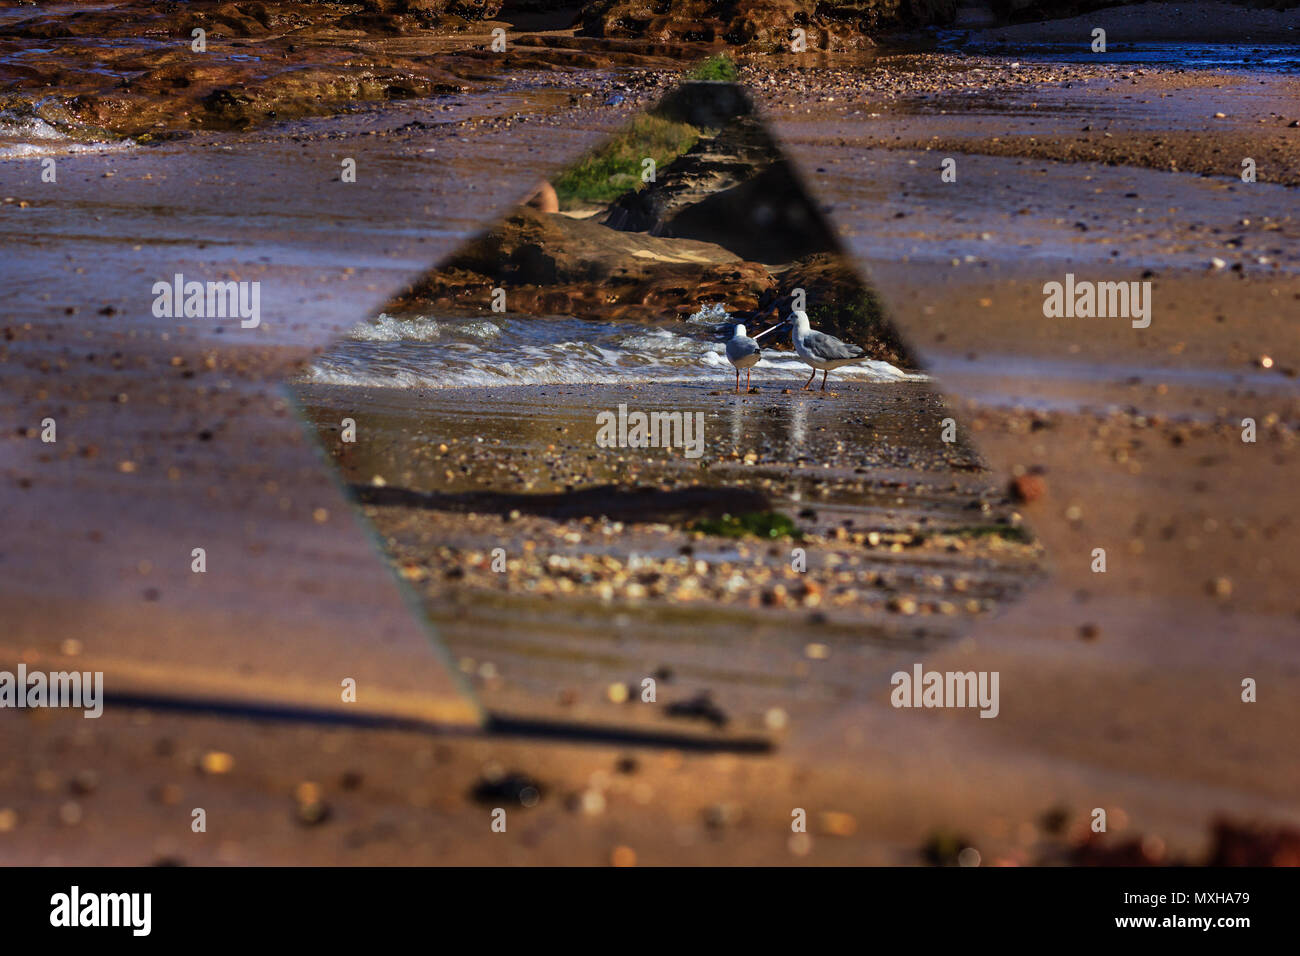 Double Take. Two seagulls on the beach at the waters edge scavenging captured by a mirror reflection. Stock Photo